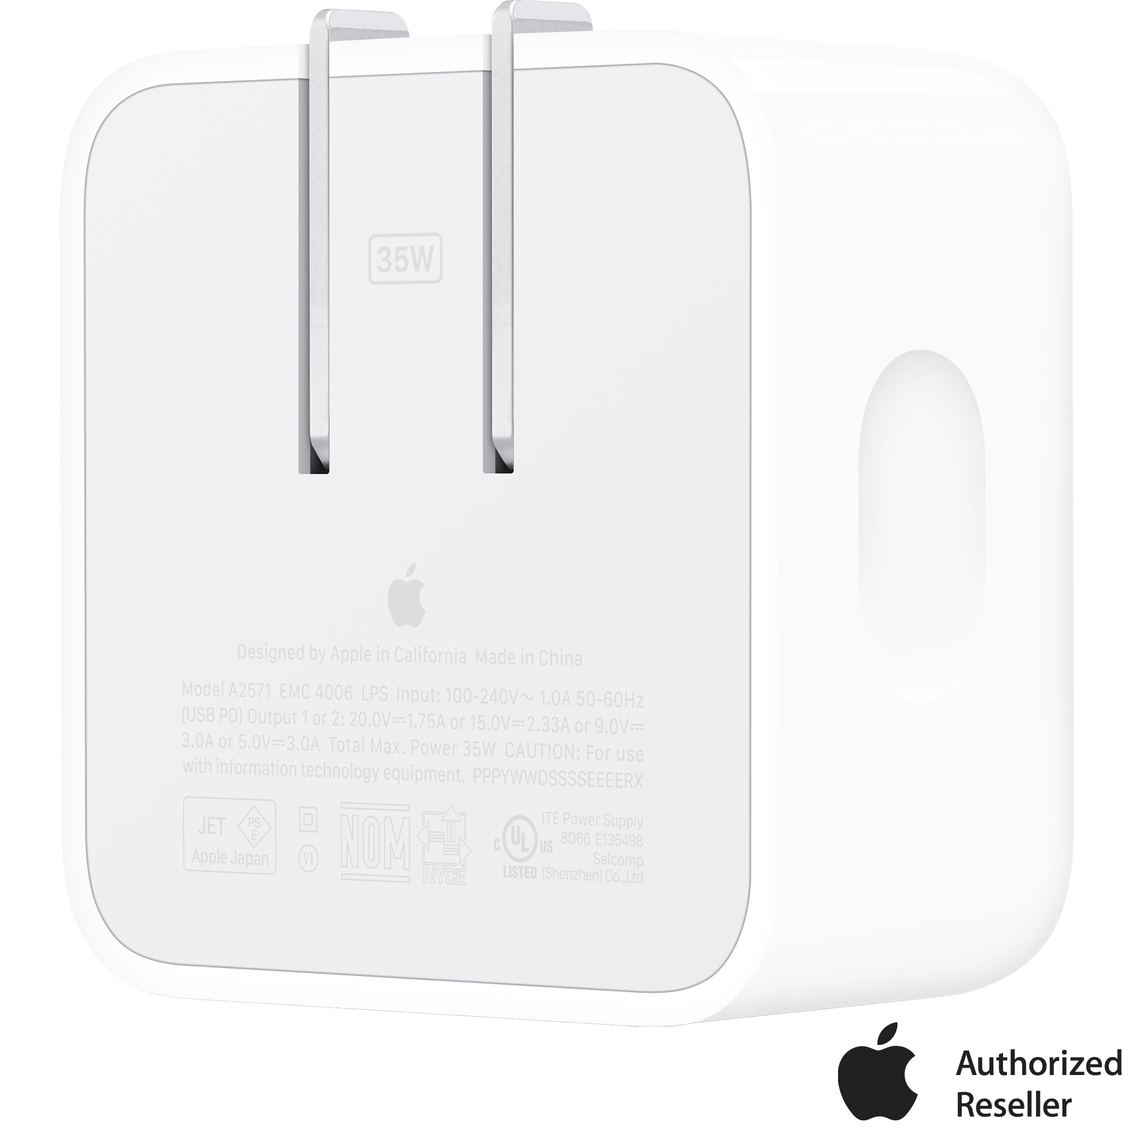 Apple 35W Dual USB-C Port Compact Power Adapter - Image 2 of 3